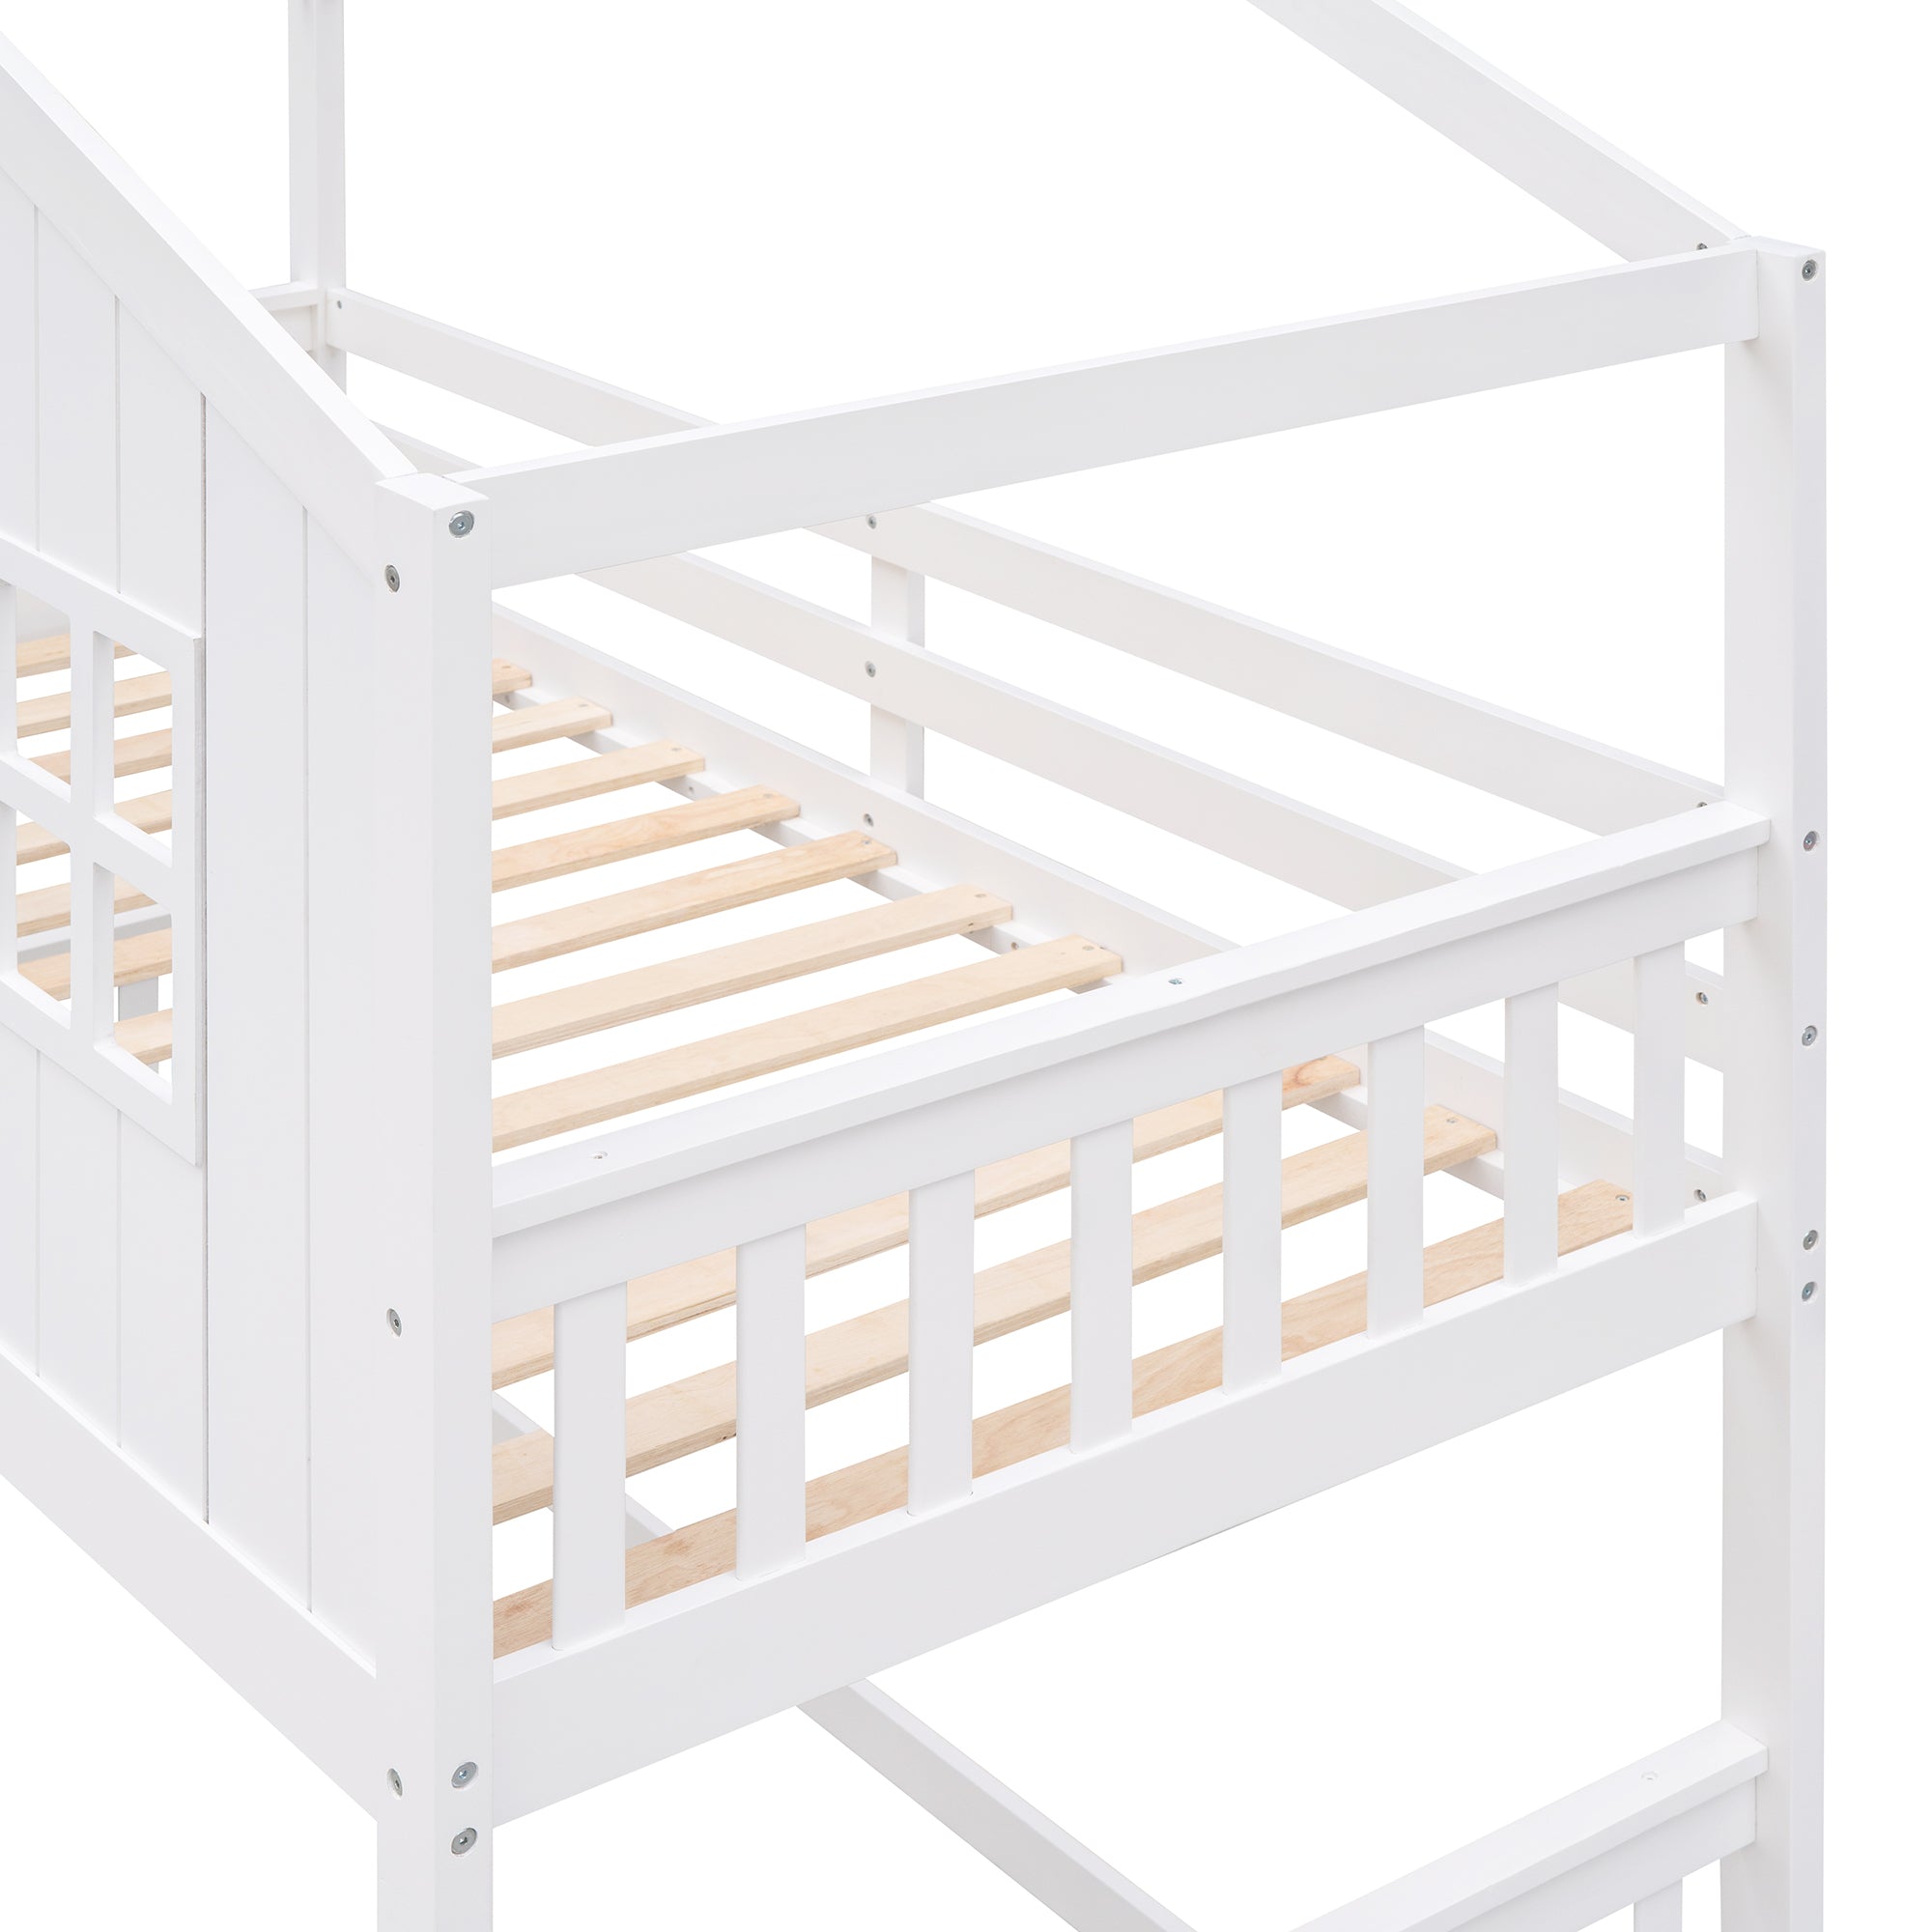 Bellemave® Twin Size Wood House Bunk Bed with Ladder Bellemave®